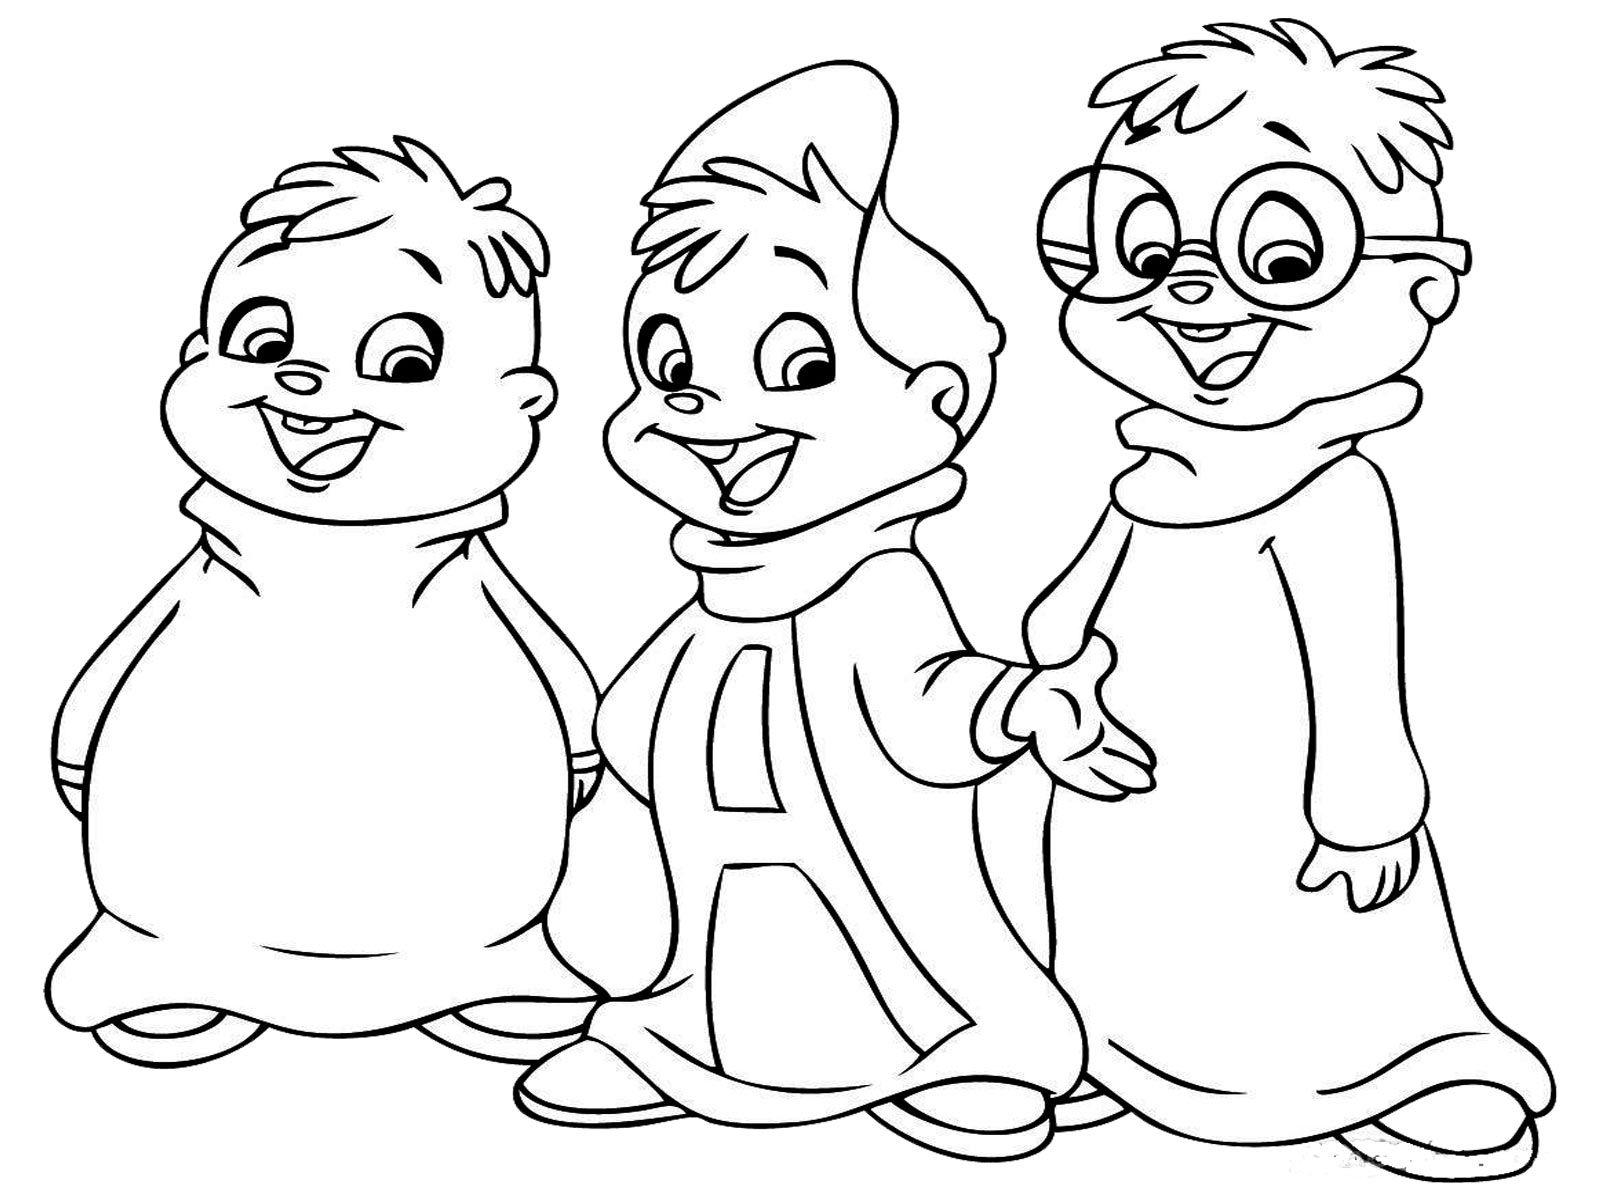 50+ Free Coloring Pages For Kids